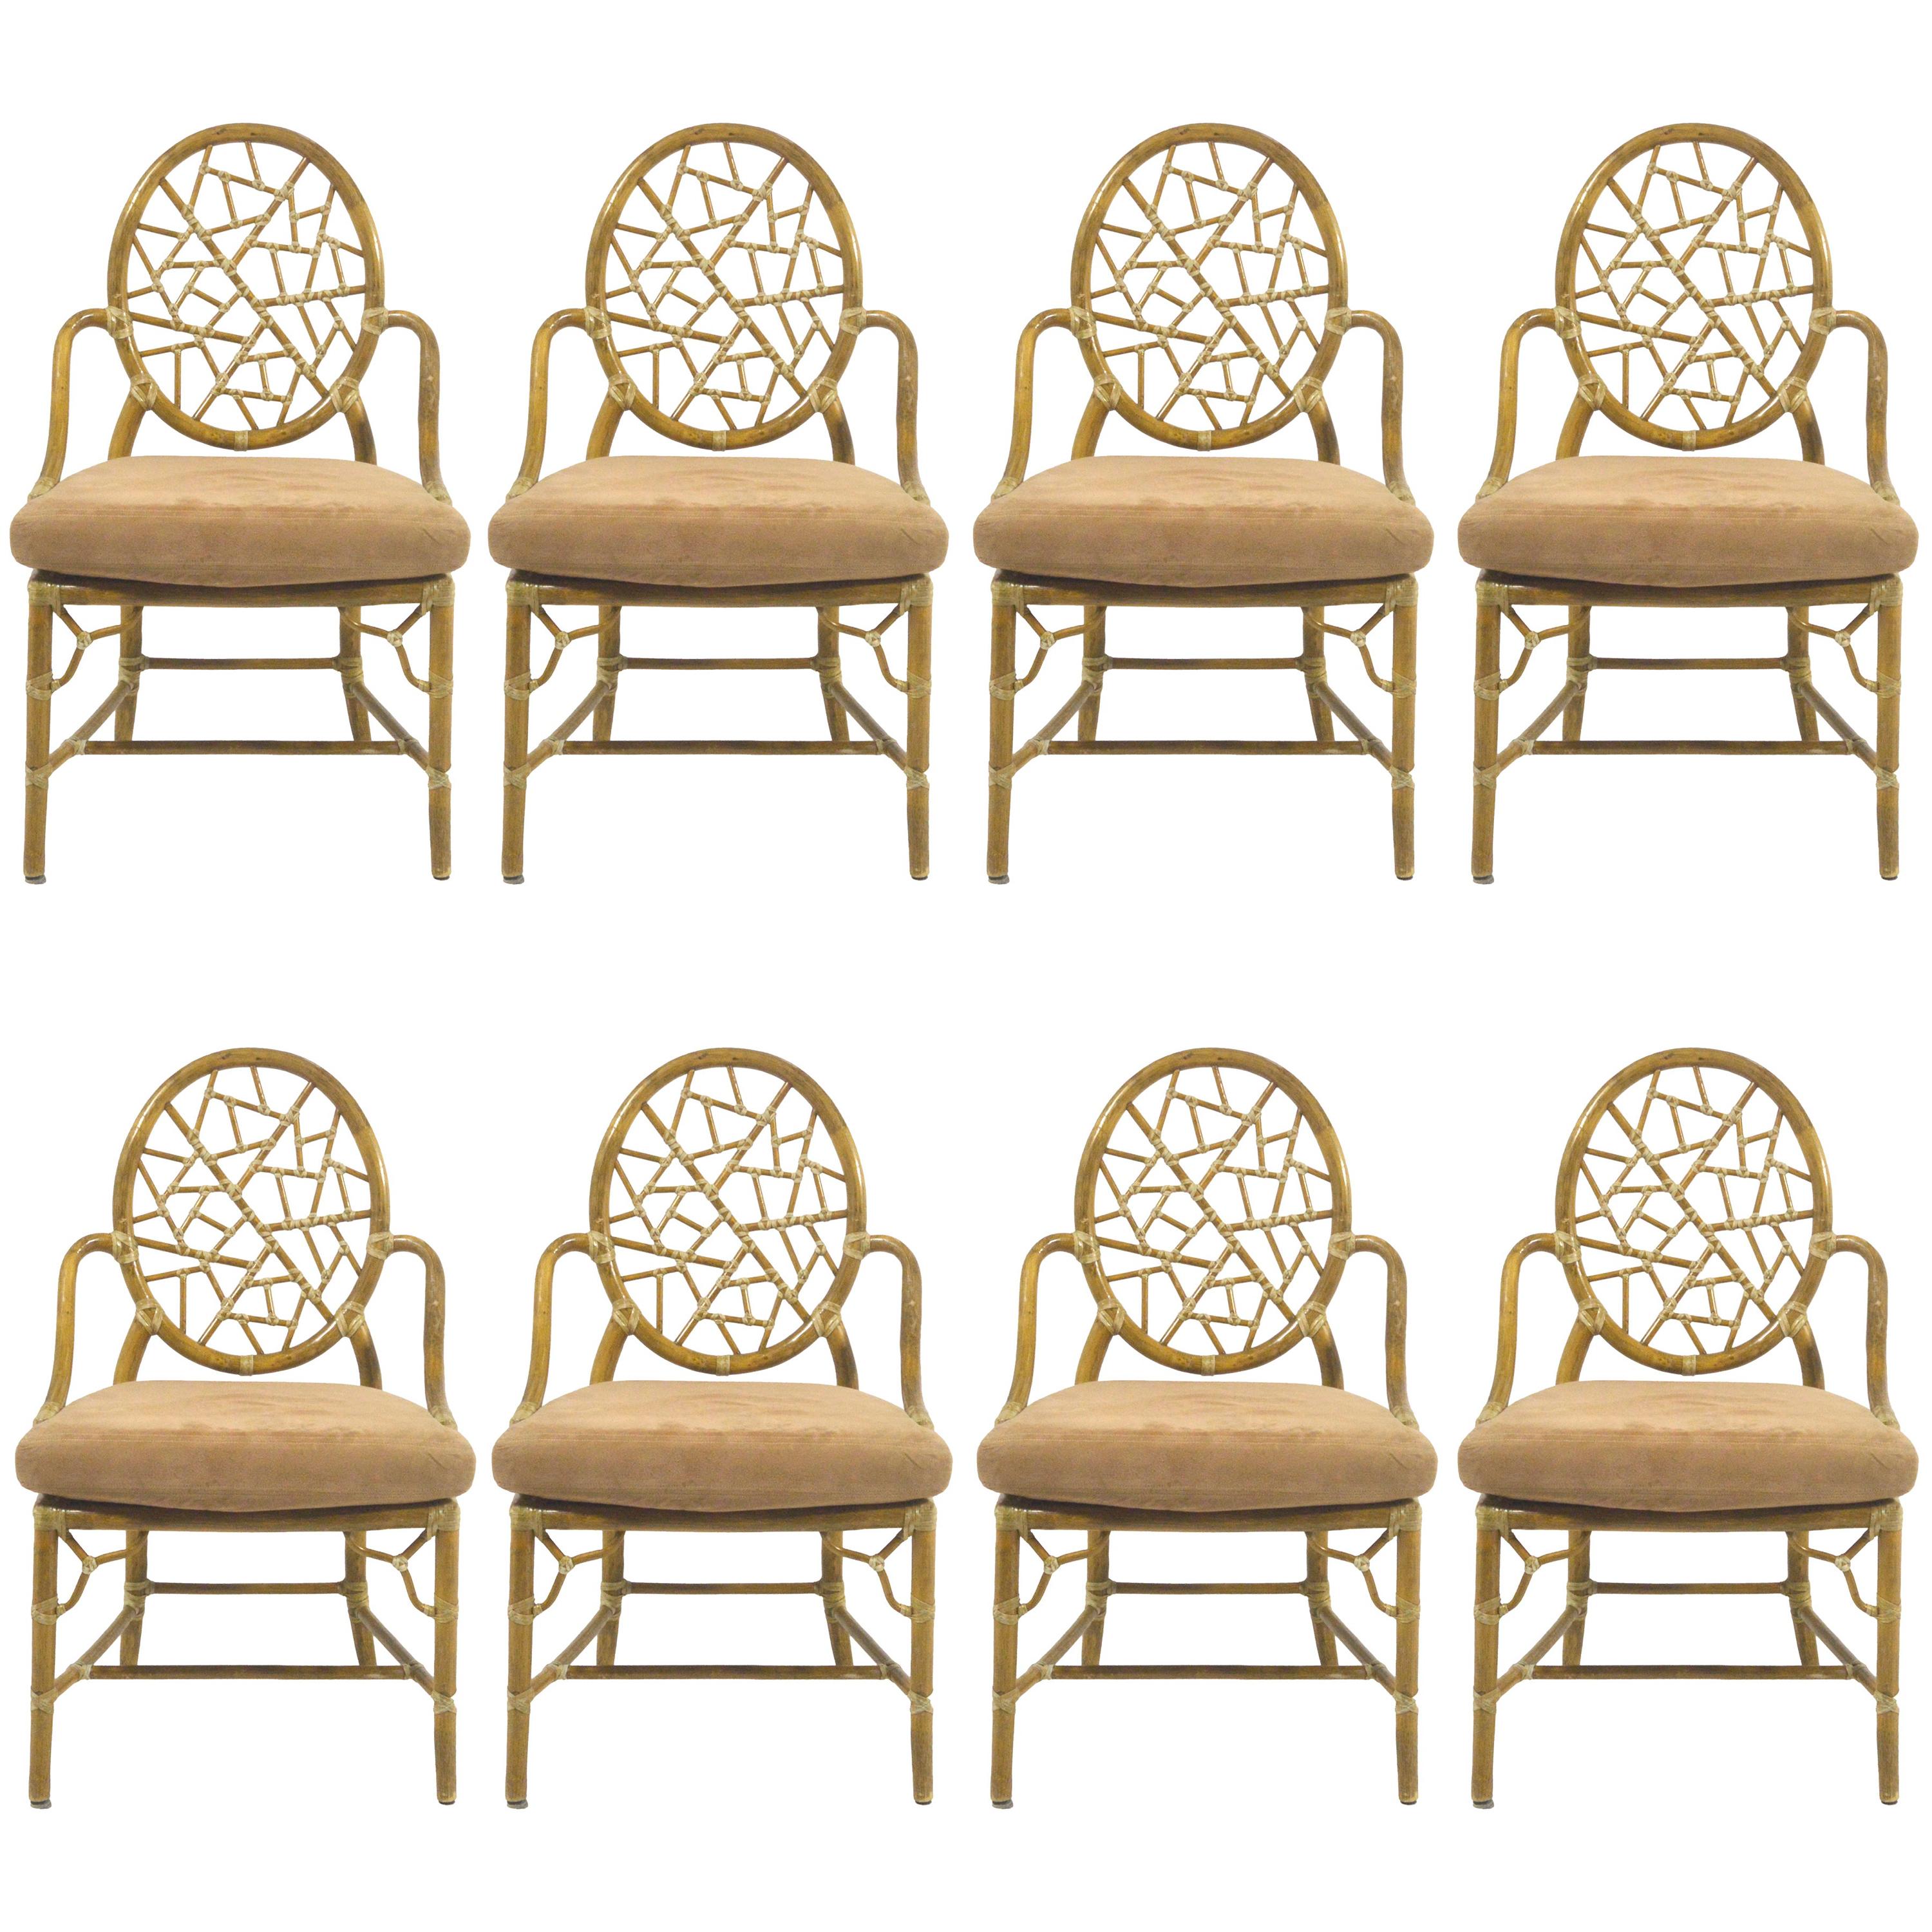 Elinor McGuire "Cracked Ice" Dining Chairs Set of 8